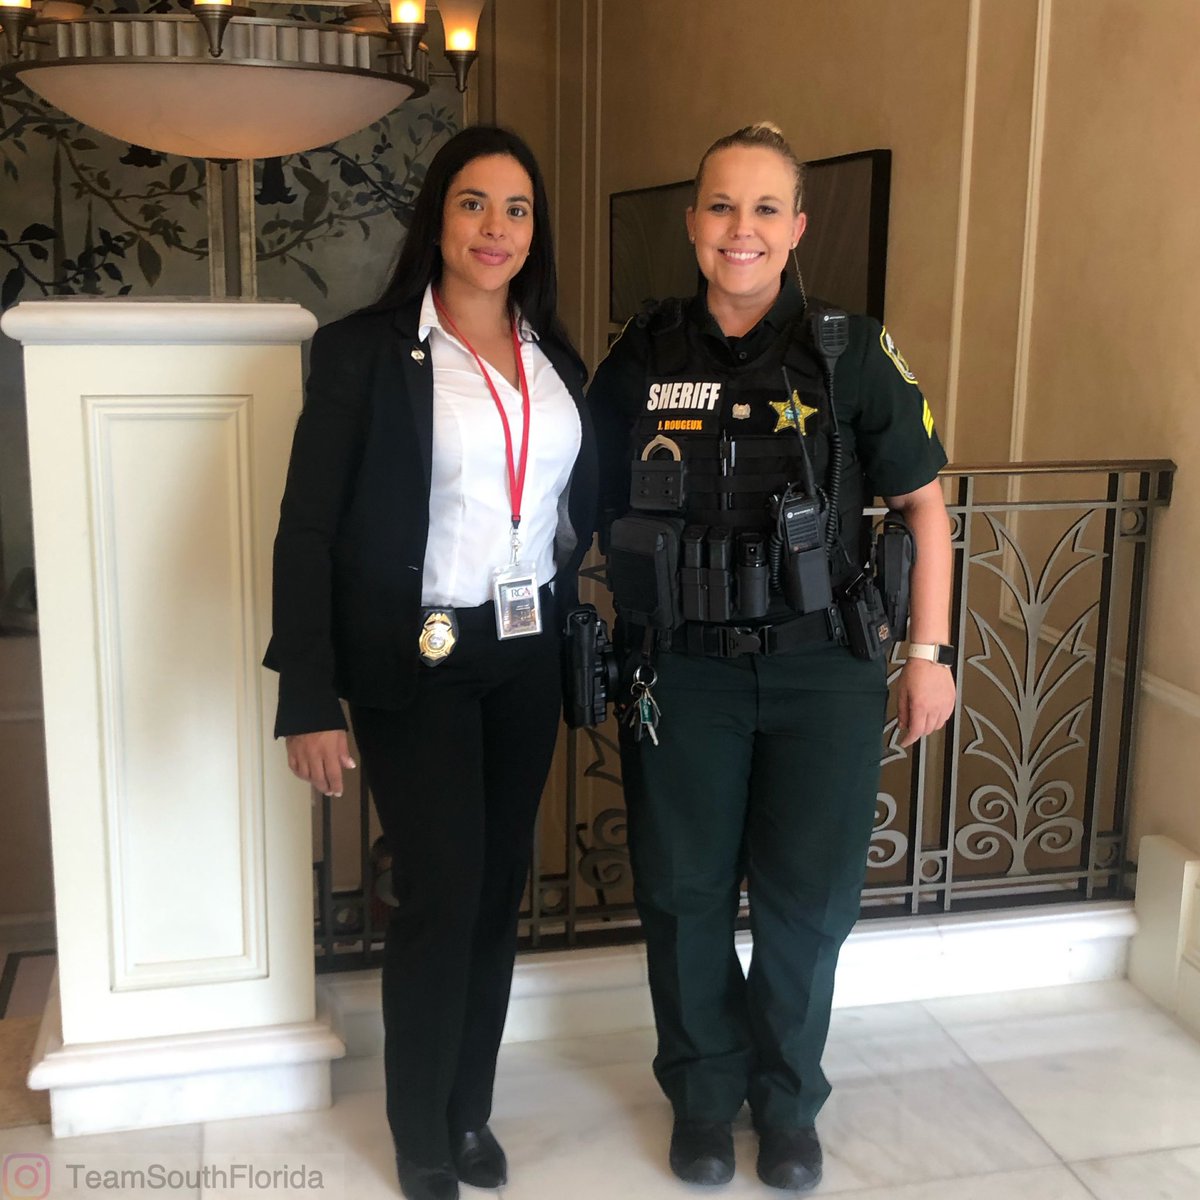 Two of Central Florida’s finest checking in on this Tuesday afternoon. Be safe ladies. Thank you for all you do !!